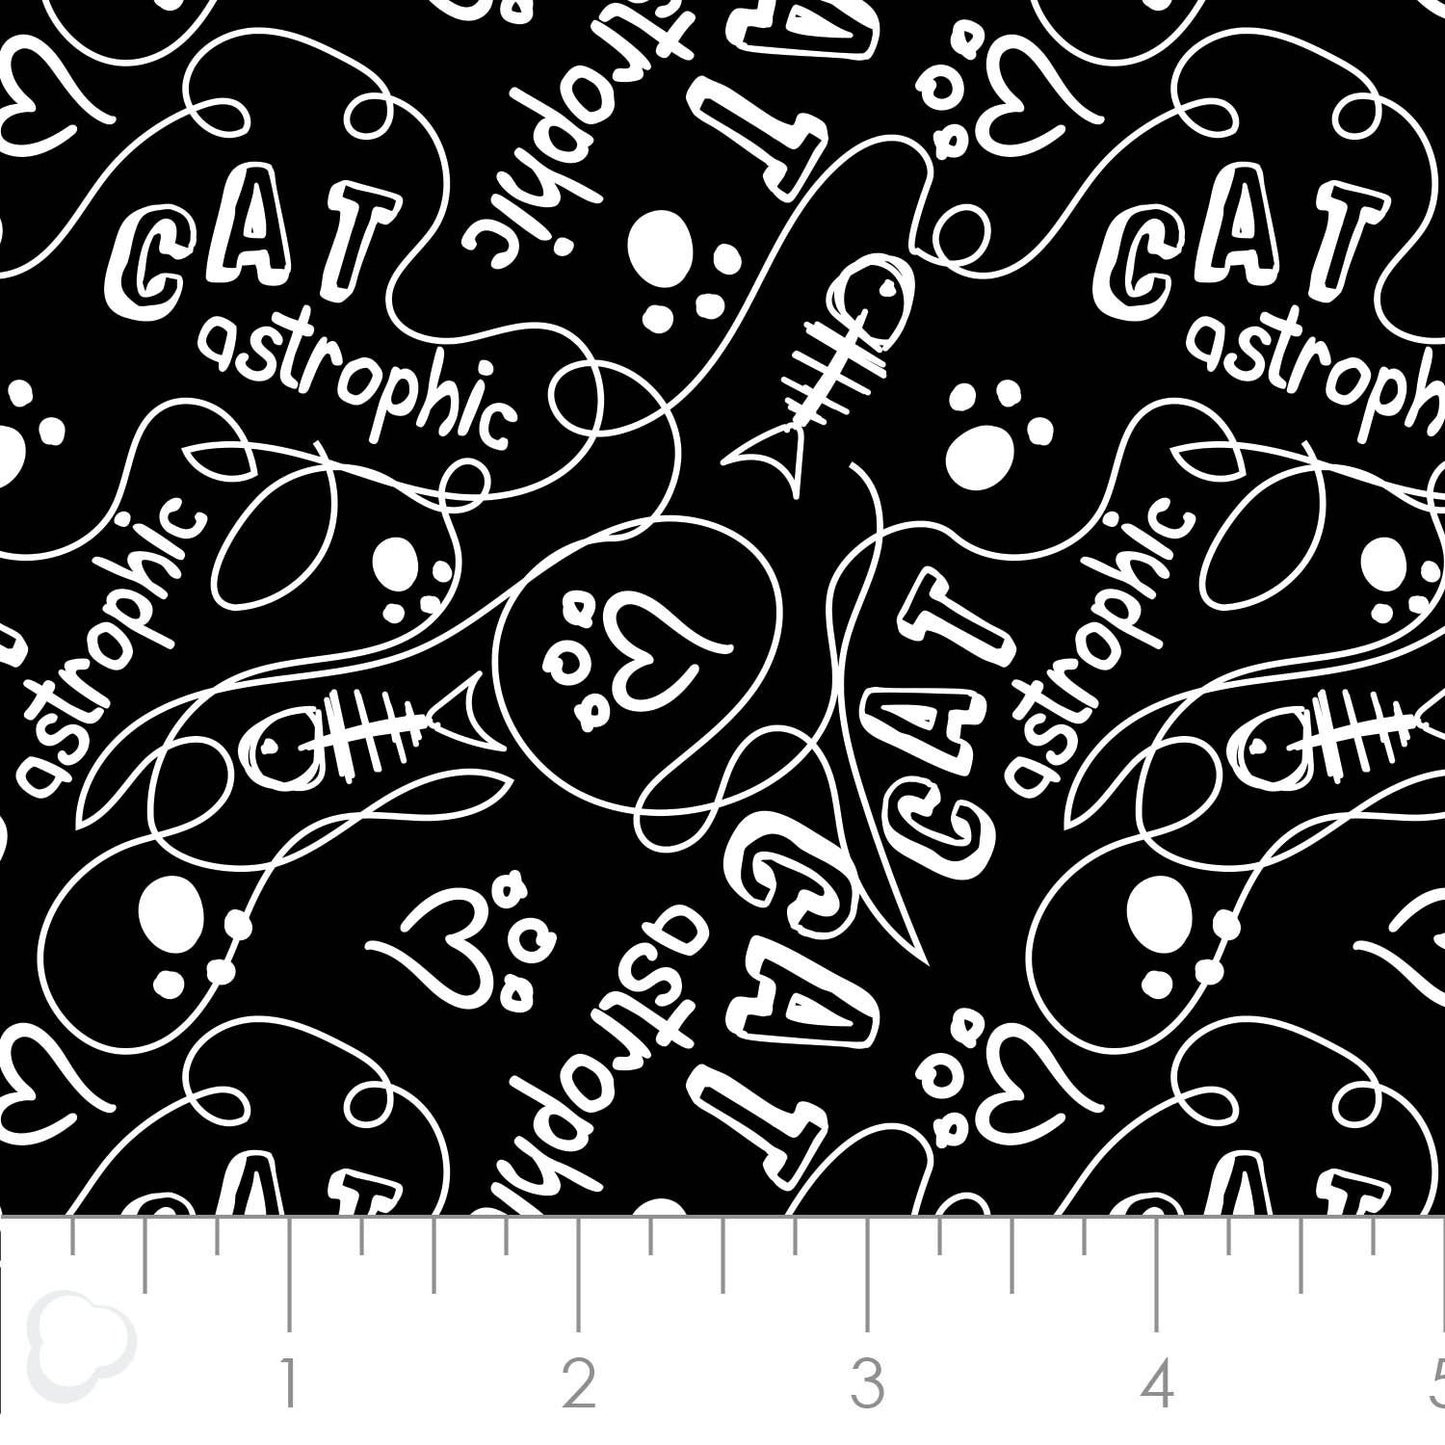 Cats Rule Catastrophic in Black 34180107-2 Cotton Woven Fabric